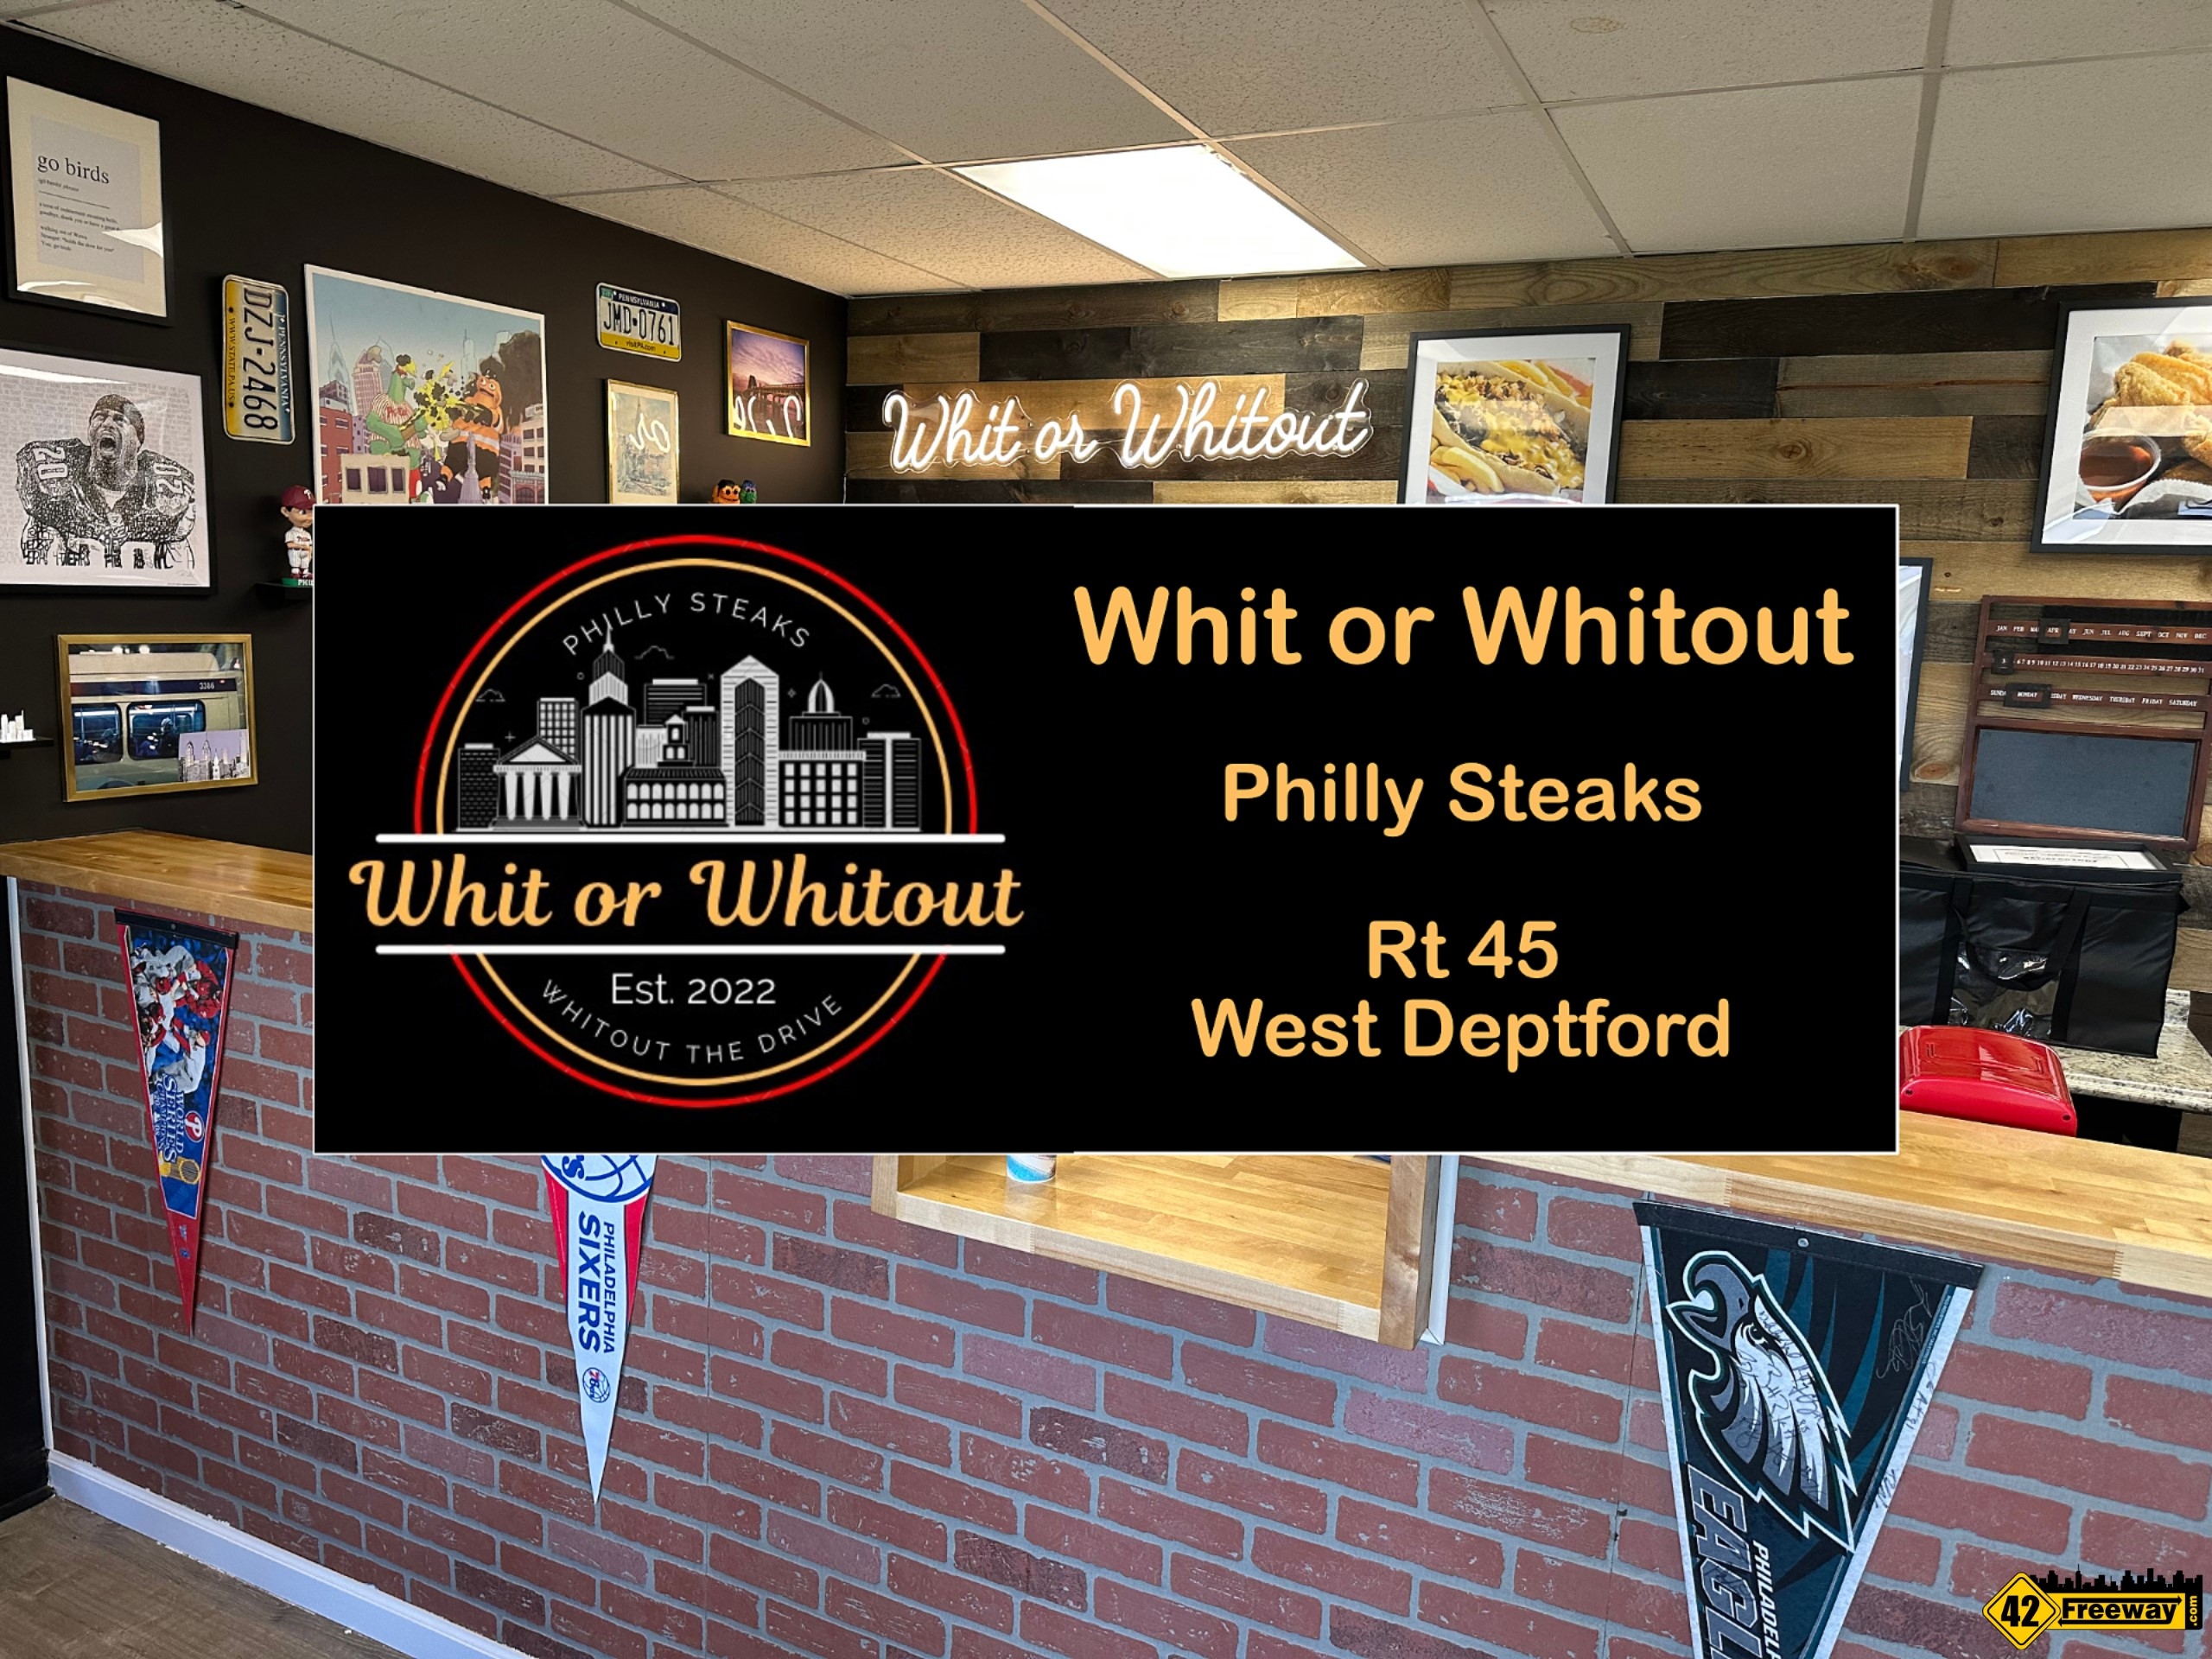 Cheesesteak Company in Brewer's Tasting Room – A Lucky Find in